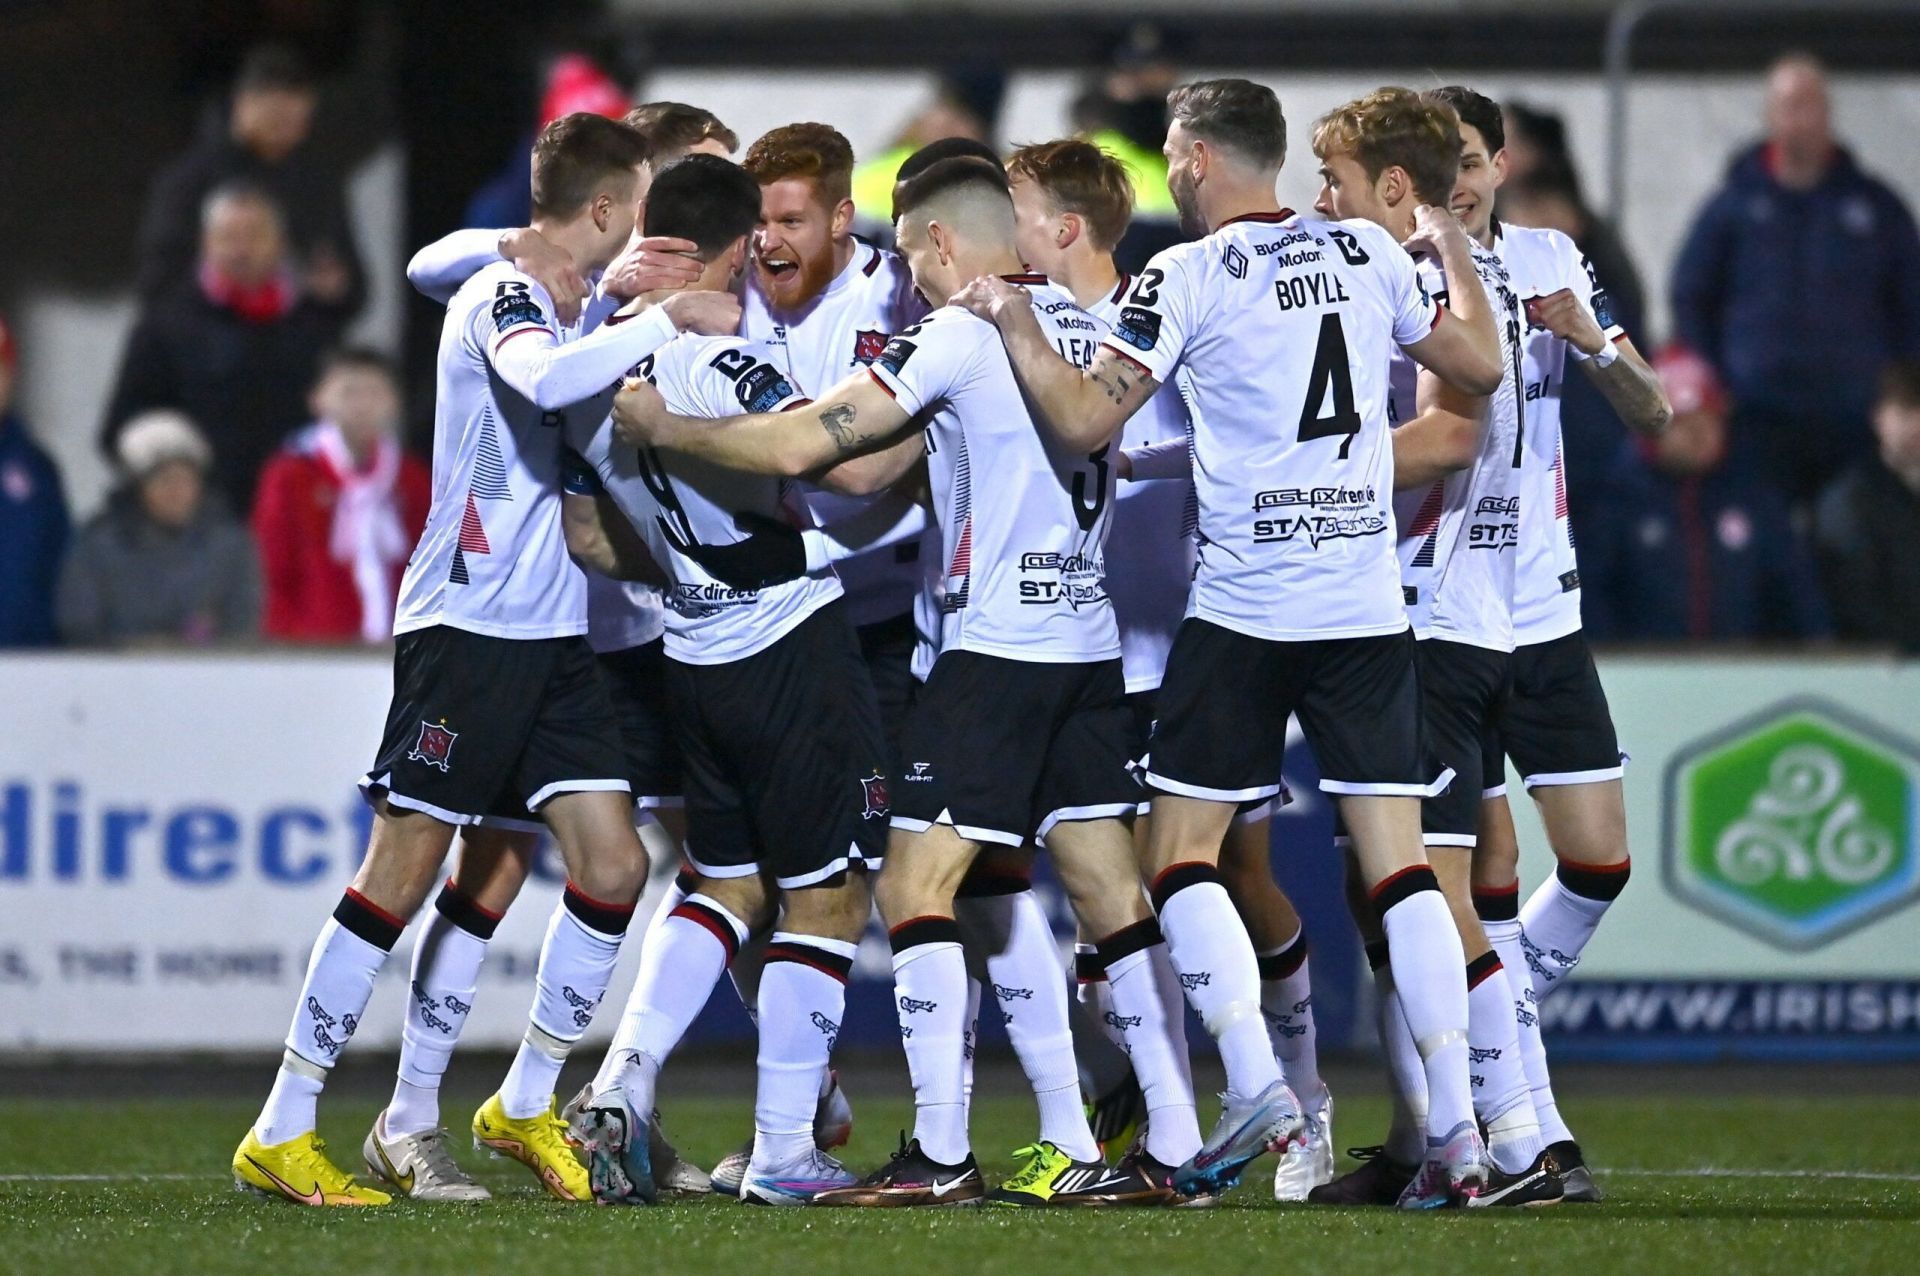 Dundalk and Magpies played out a 0-0 draw in the first leg 